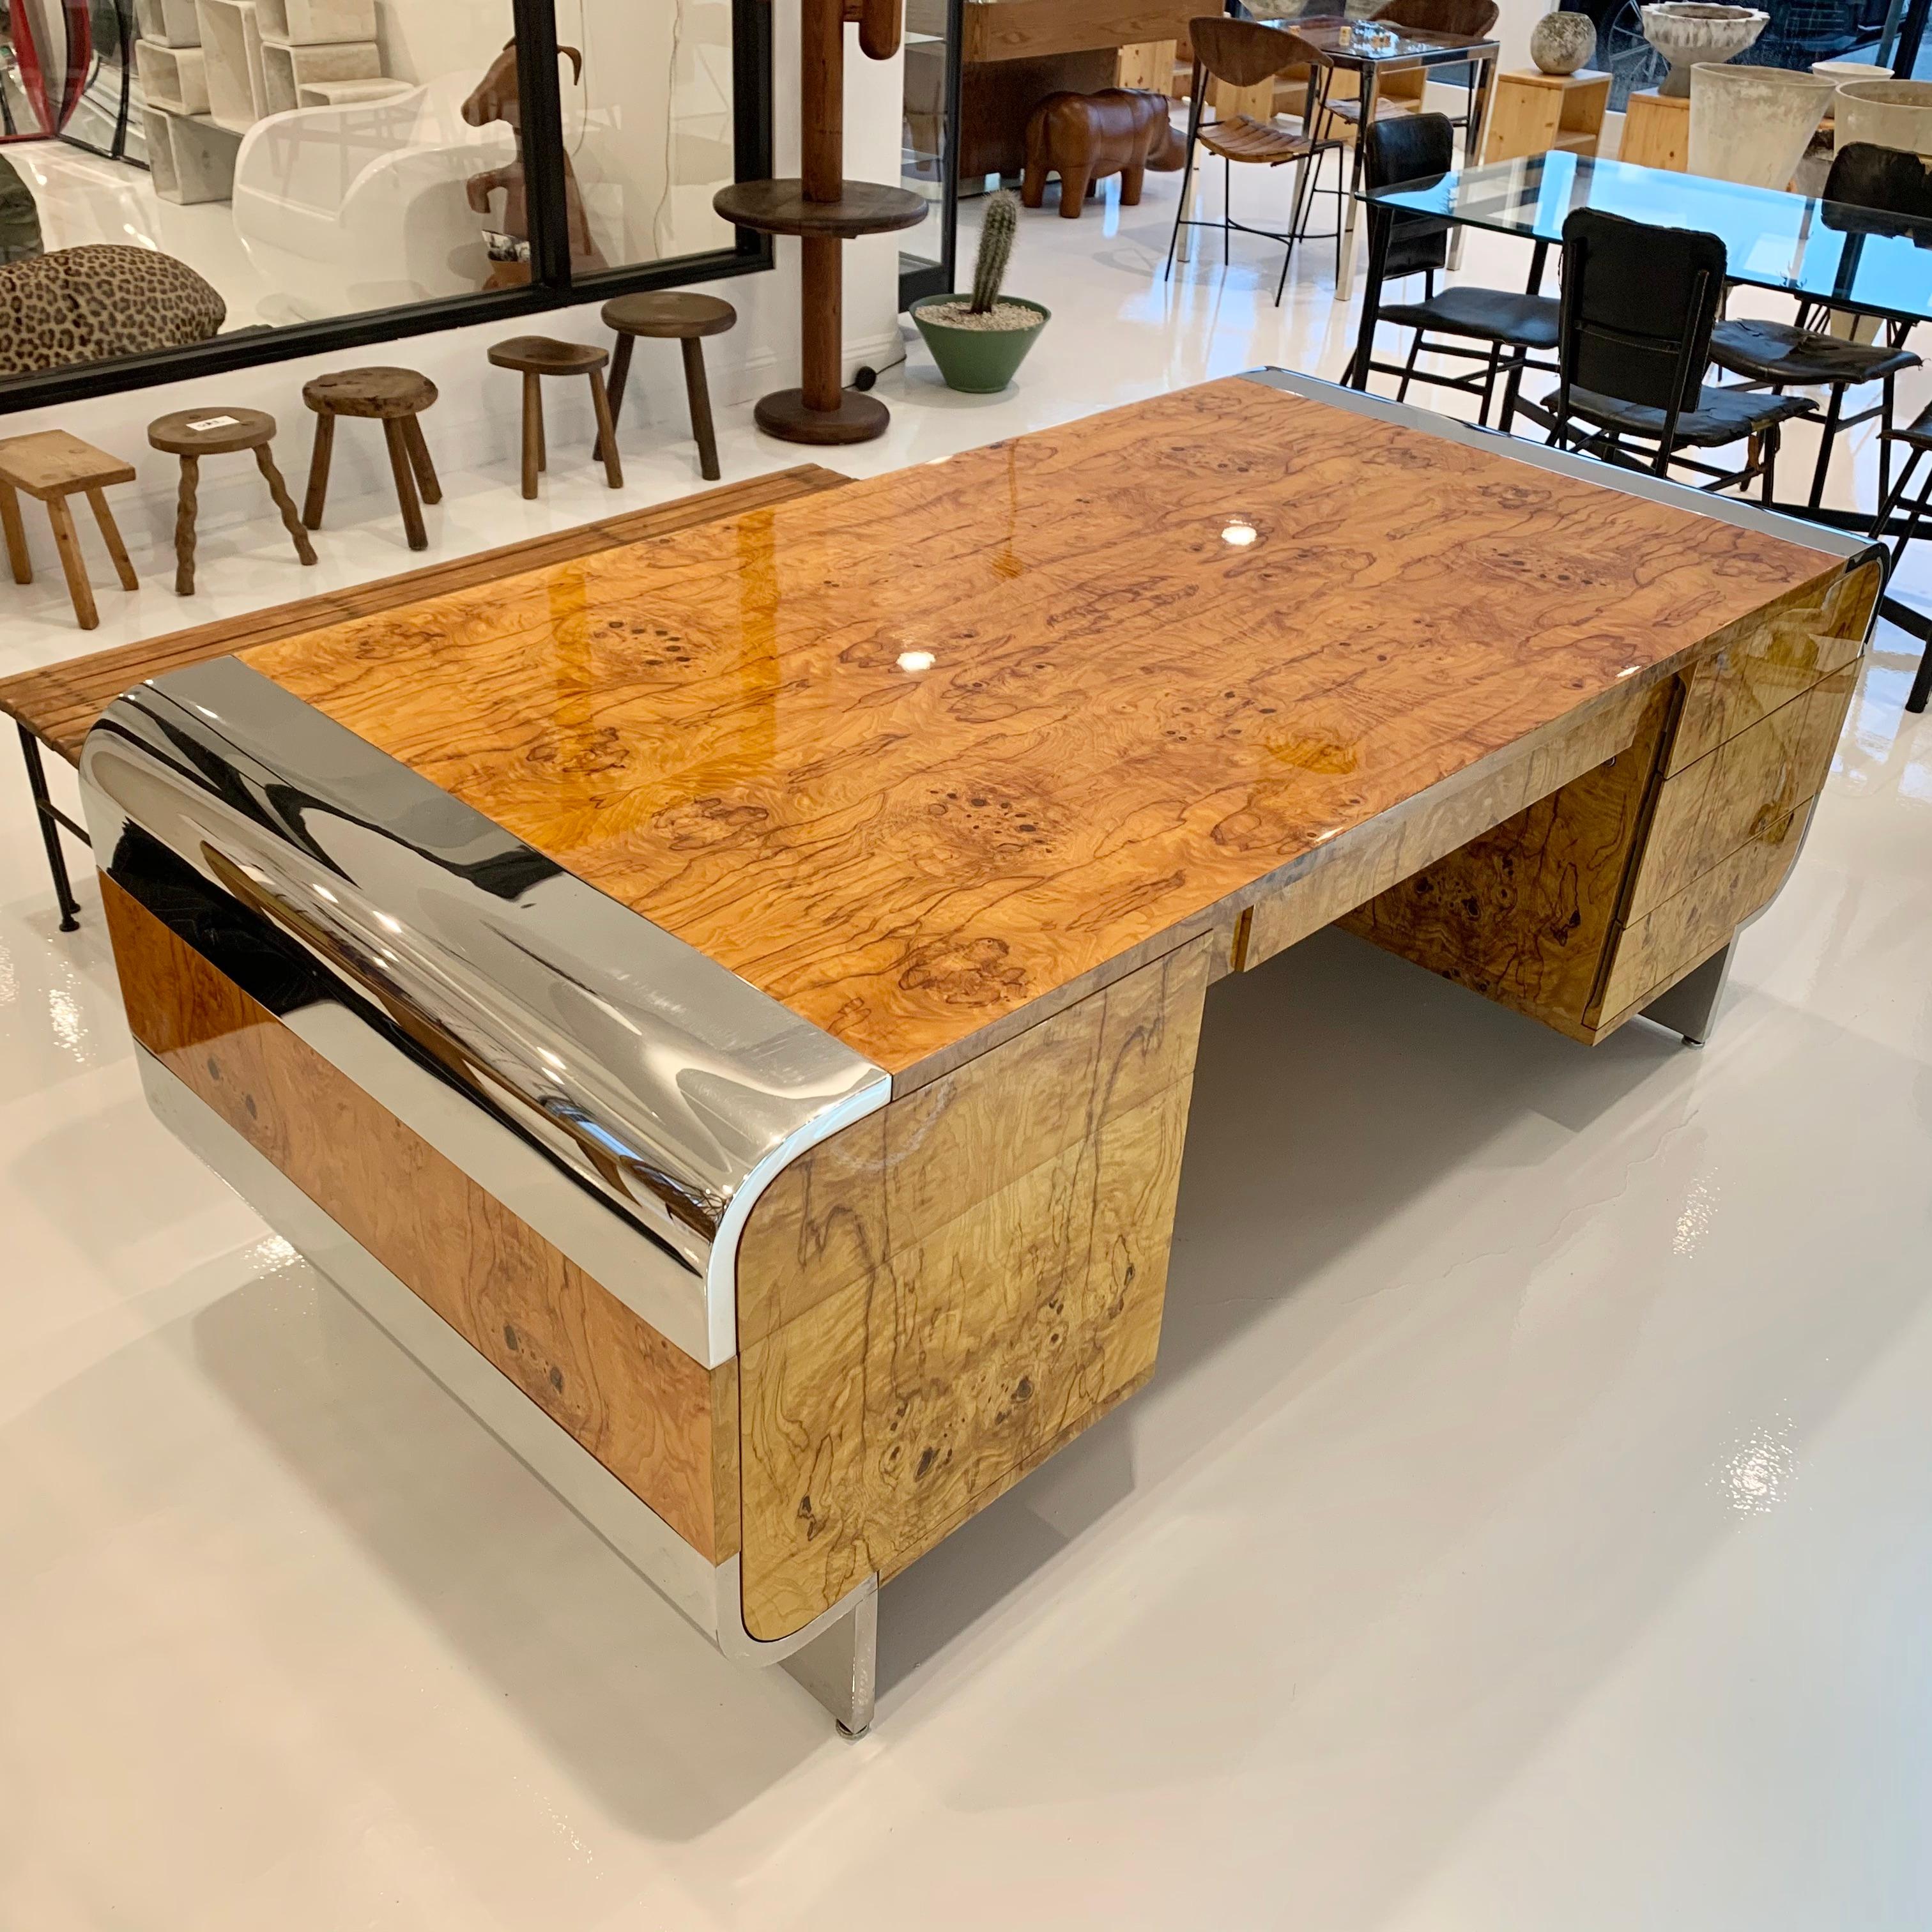 Stunning burl wood and stainless steel desk by Pace, designed by Irving Rosen. Waterfall edges with polished stainless steel. Wood is a polished Burl. 3 drawers flank the left side and two drawers flank the right side, including a large file drawer.